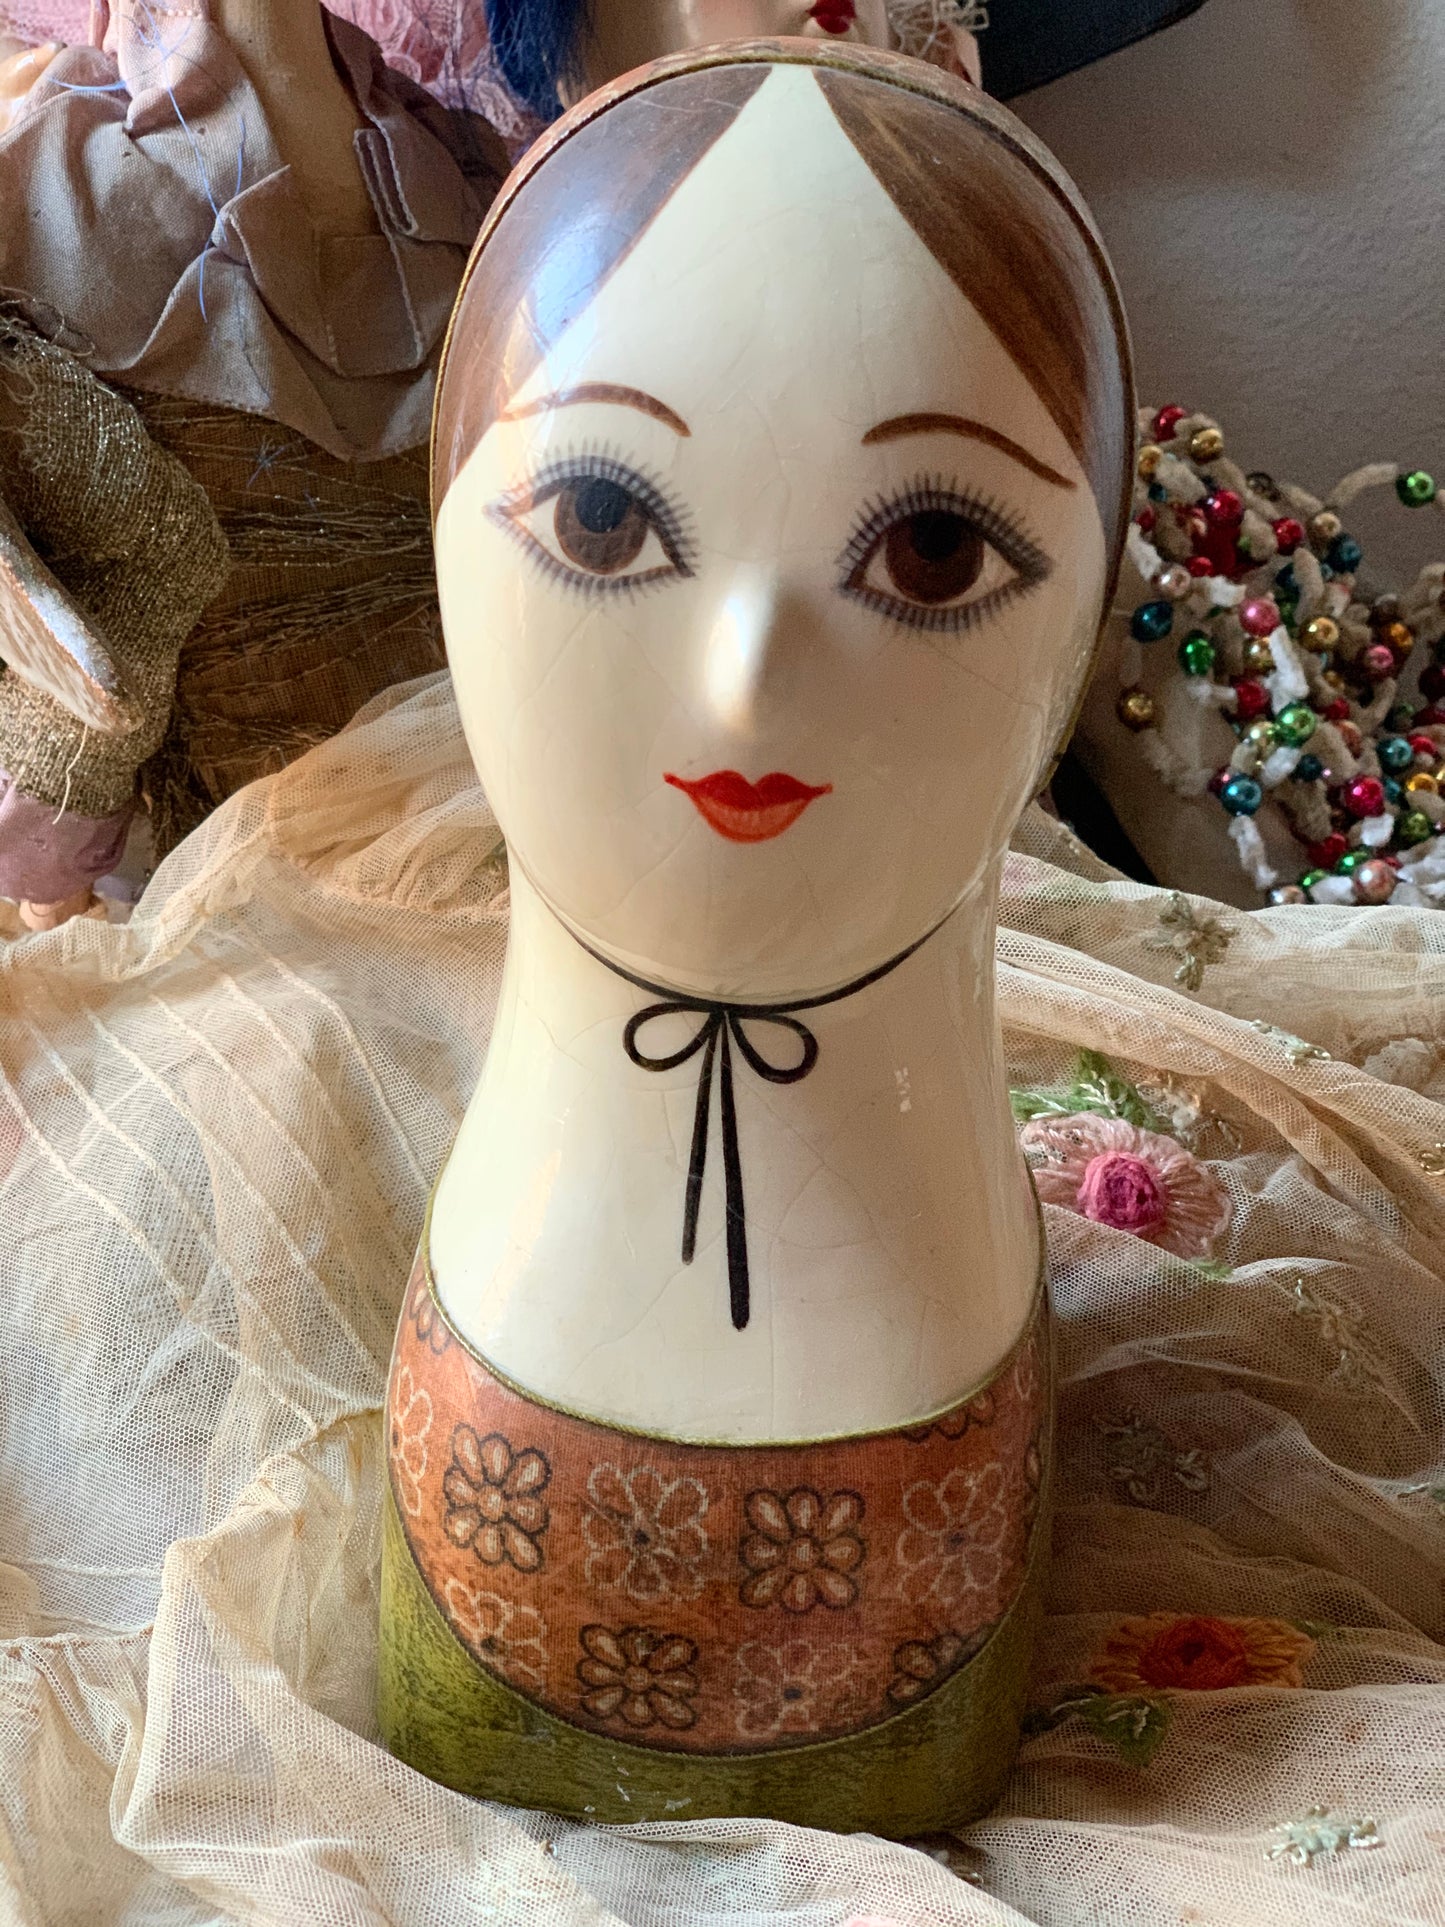 Vintage Gemma Taccogna and Fred Sexton girl bust